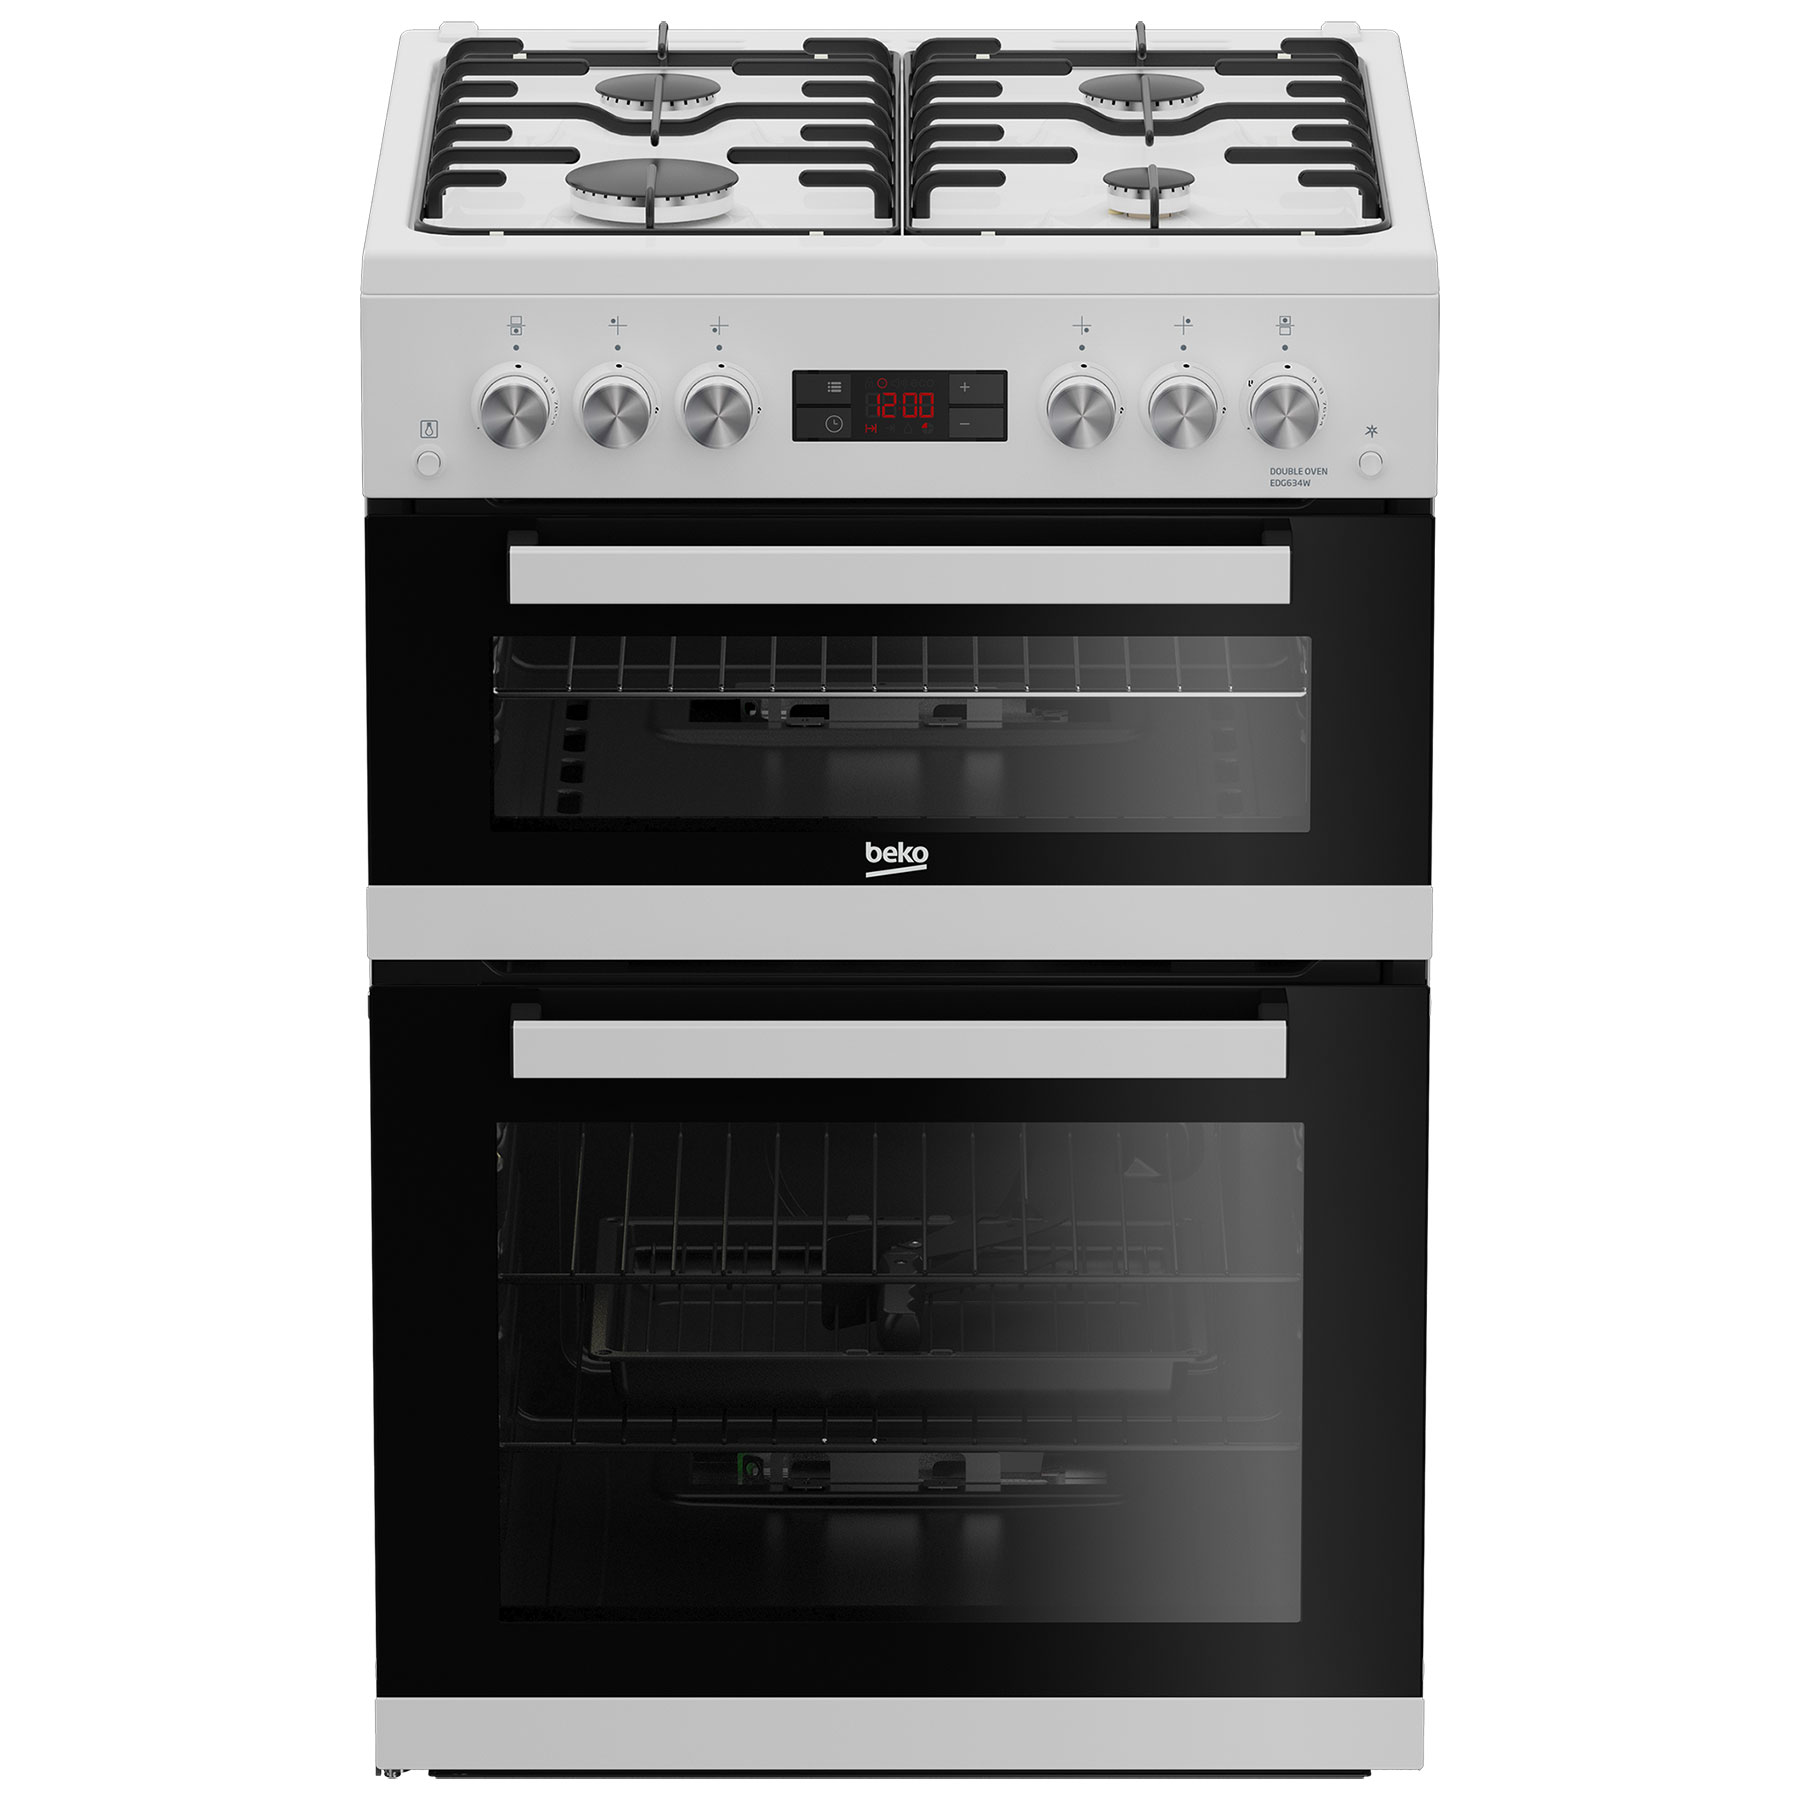 Image of Beko EDG634W 60cm Double Oven Gas Cooker in White